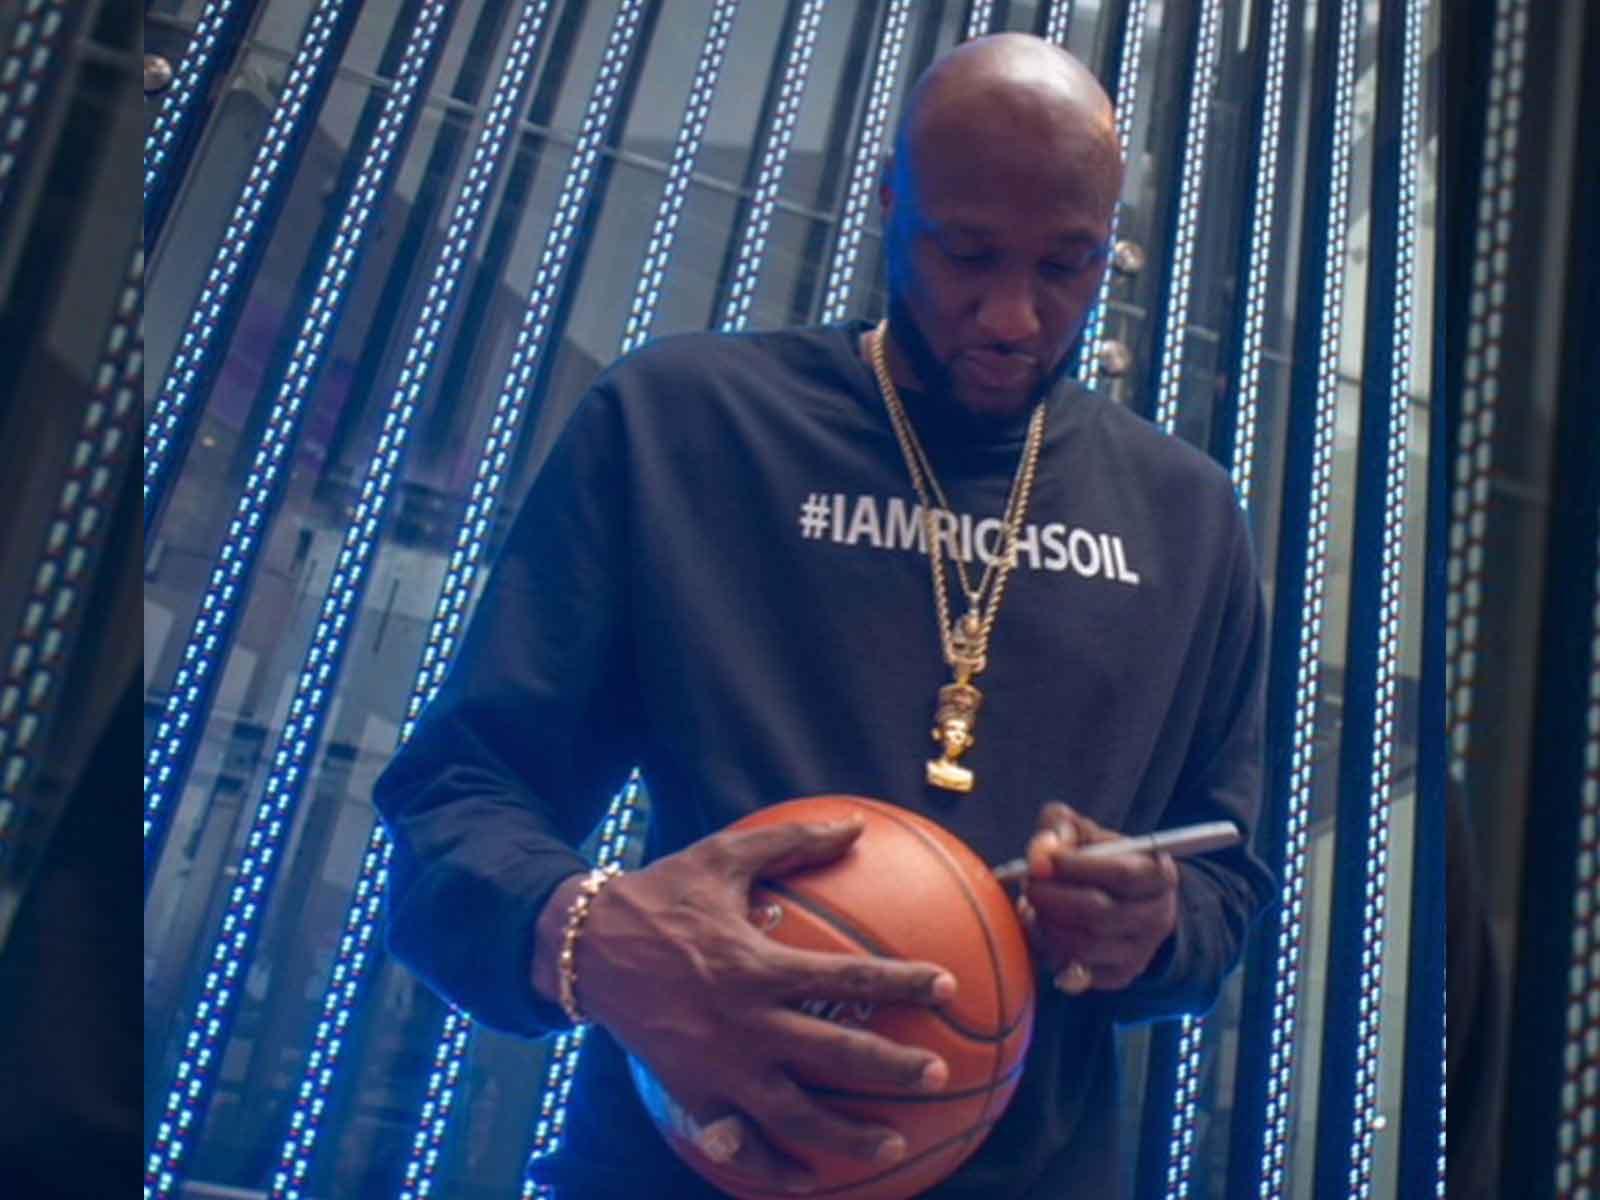 Lamar Odom Attracts HUGE, Kylie Jenner-Sized Crowd At Pop-Up Shop